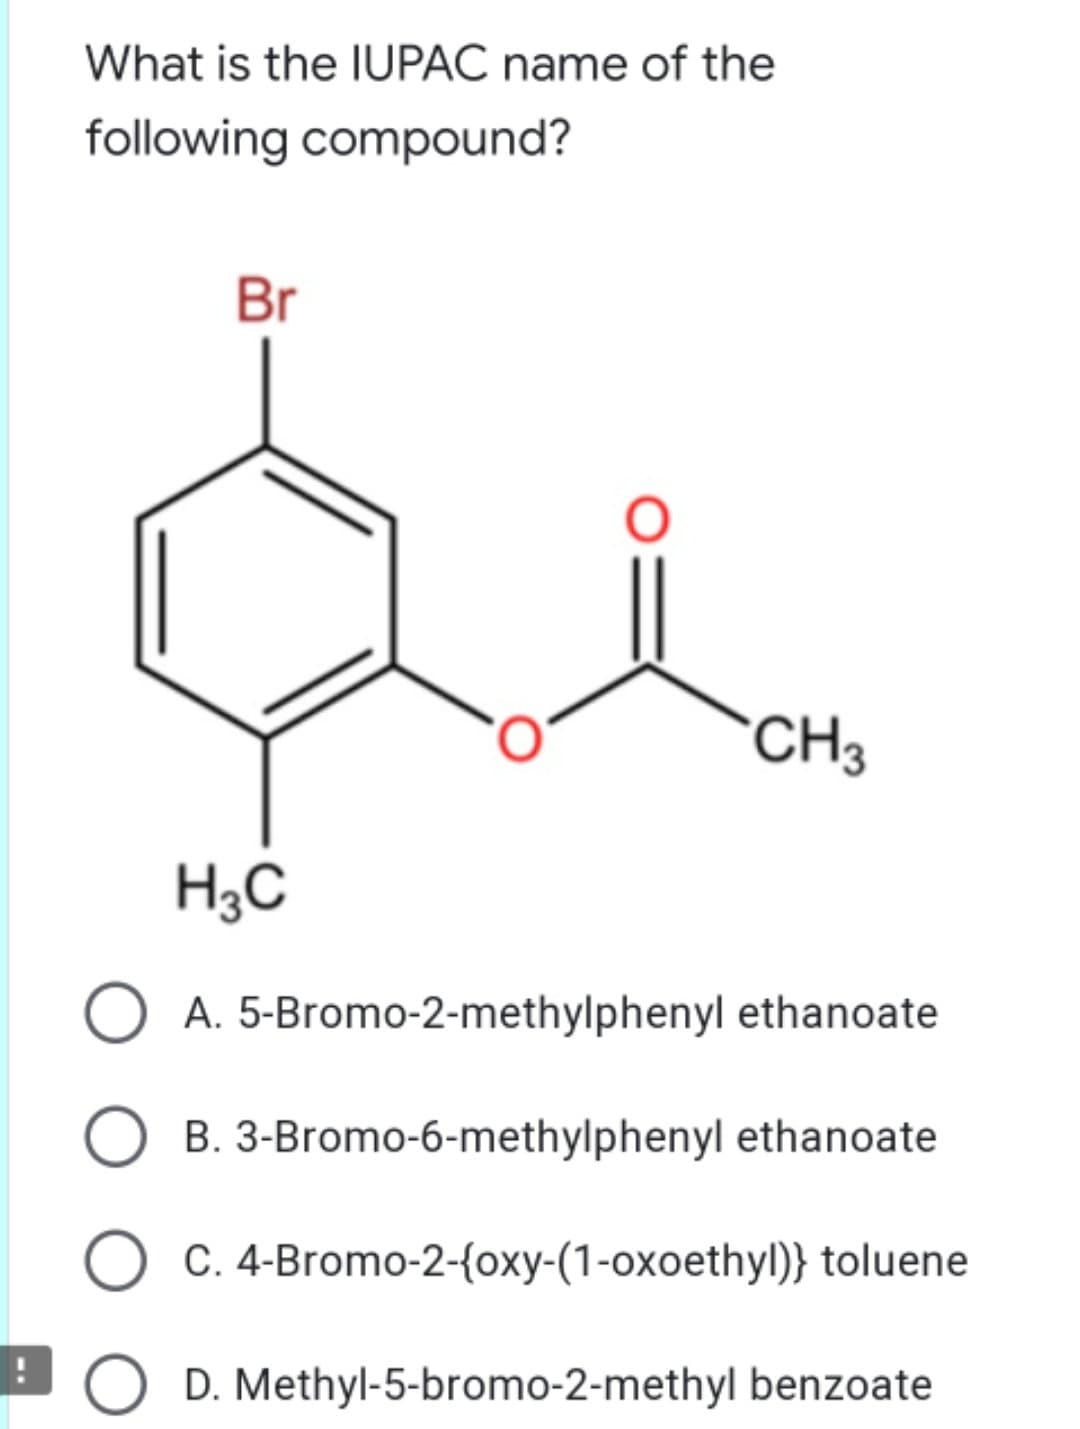 What is the IUPAC name of the
following compound?
Br
CH3
H3C
O A. 5-Bromo-2-methylphenyl ethanoate
B. 3-Bromo-6-methylphenyl ethanoate
C. 4-Bromo-2-{oxy-(1-oxoethyl)} toluene
EO D. Methyl-5-bromo-2-methyl benzoate
